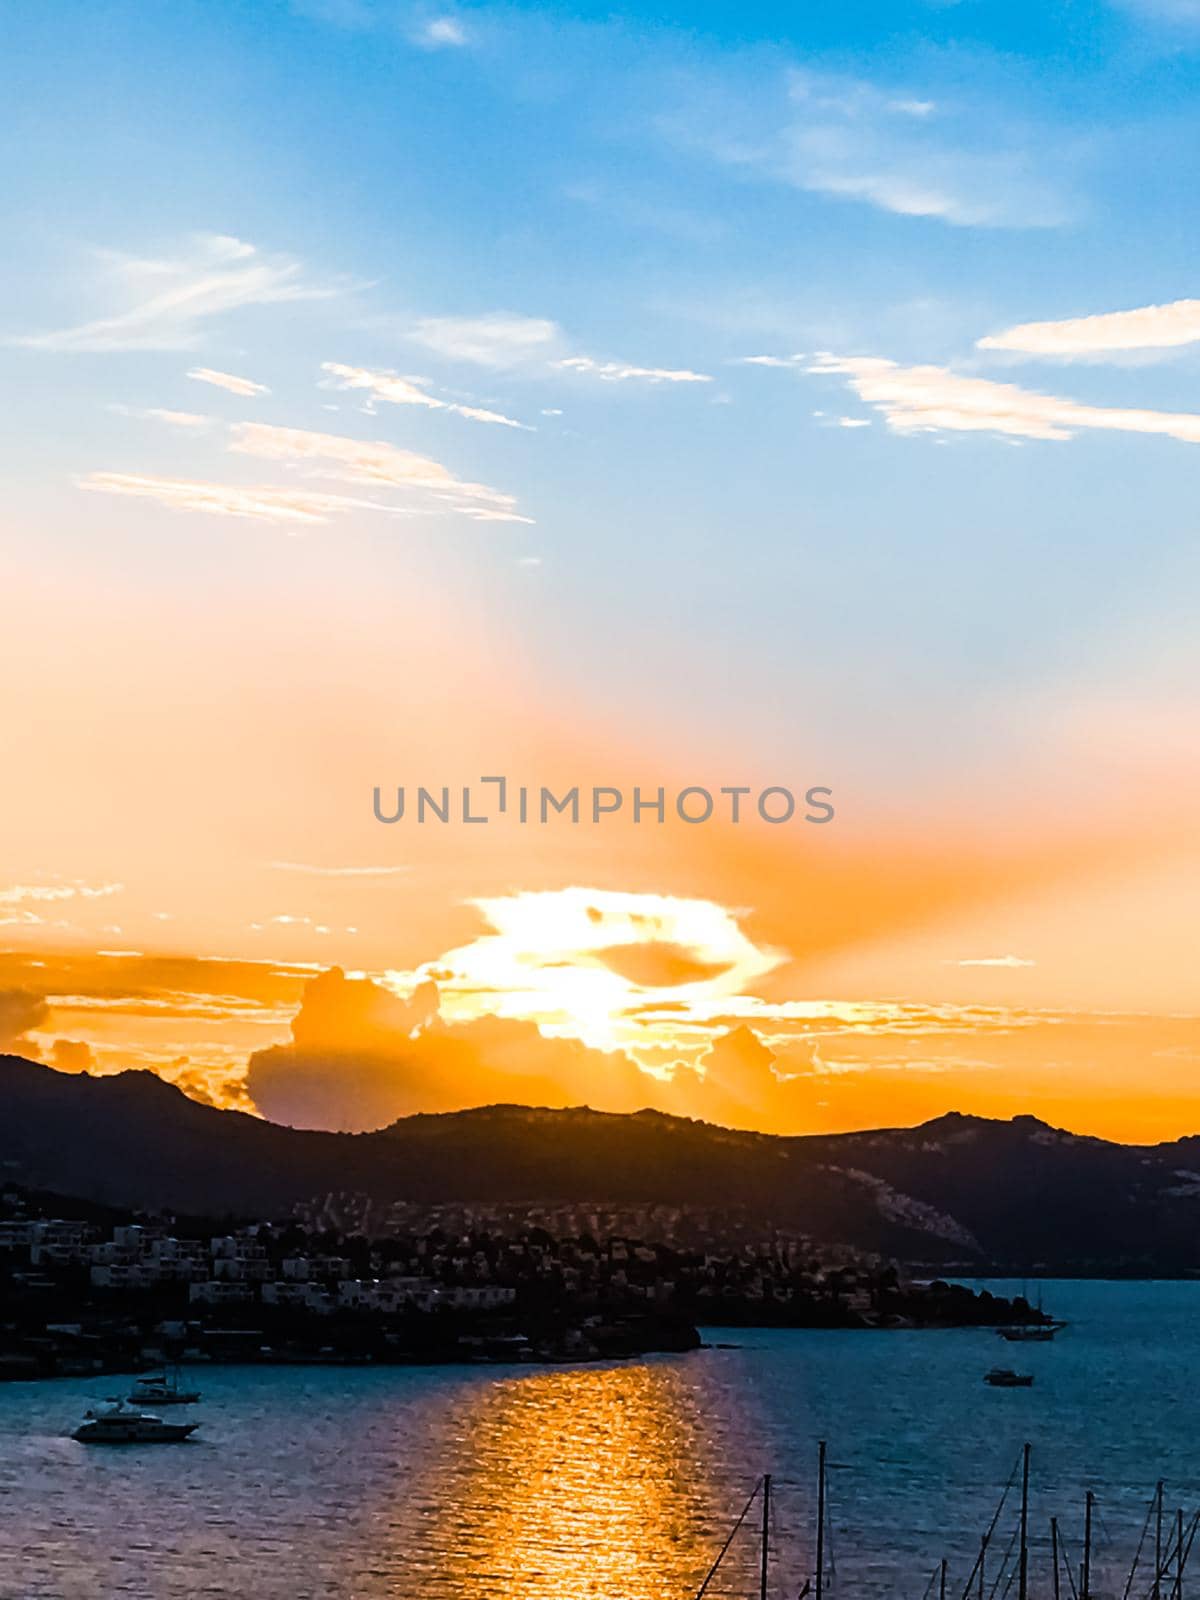 Summer vacation, mobile photography and coastal night concept - Sunset on the coast, beautiful sea view background